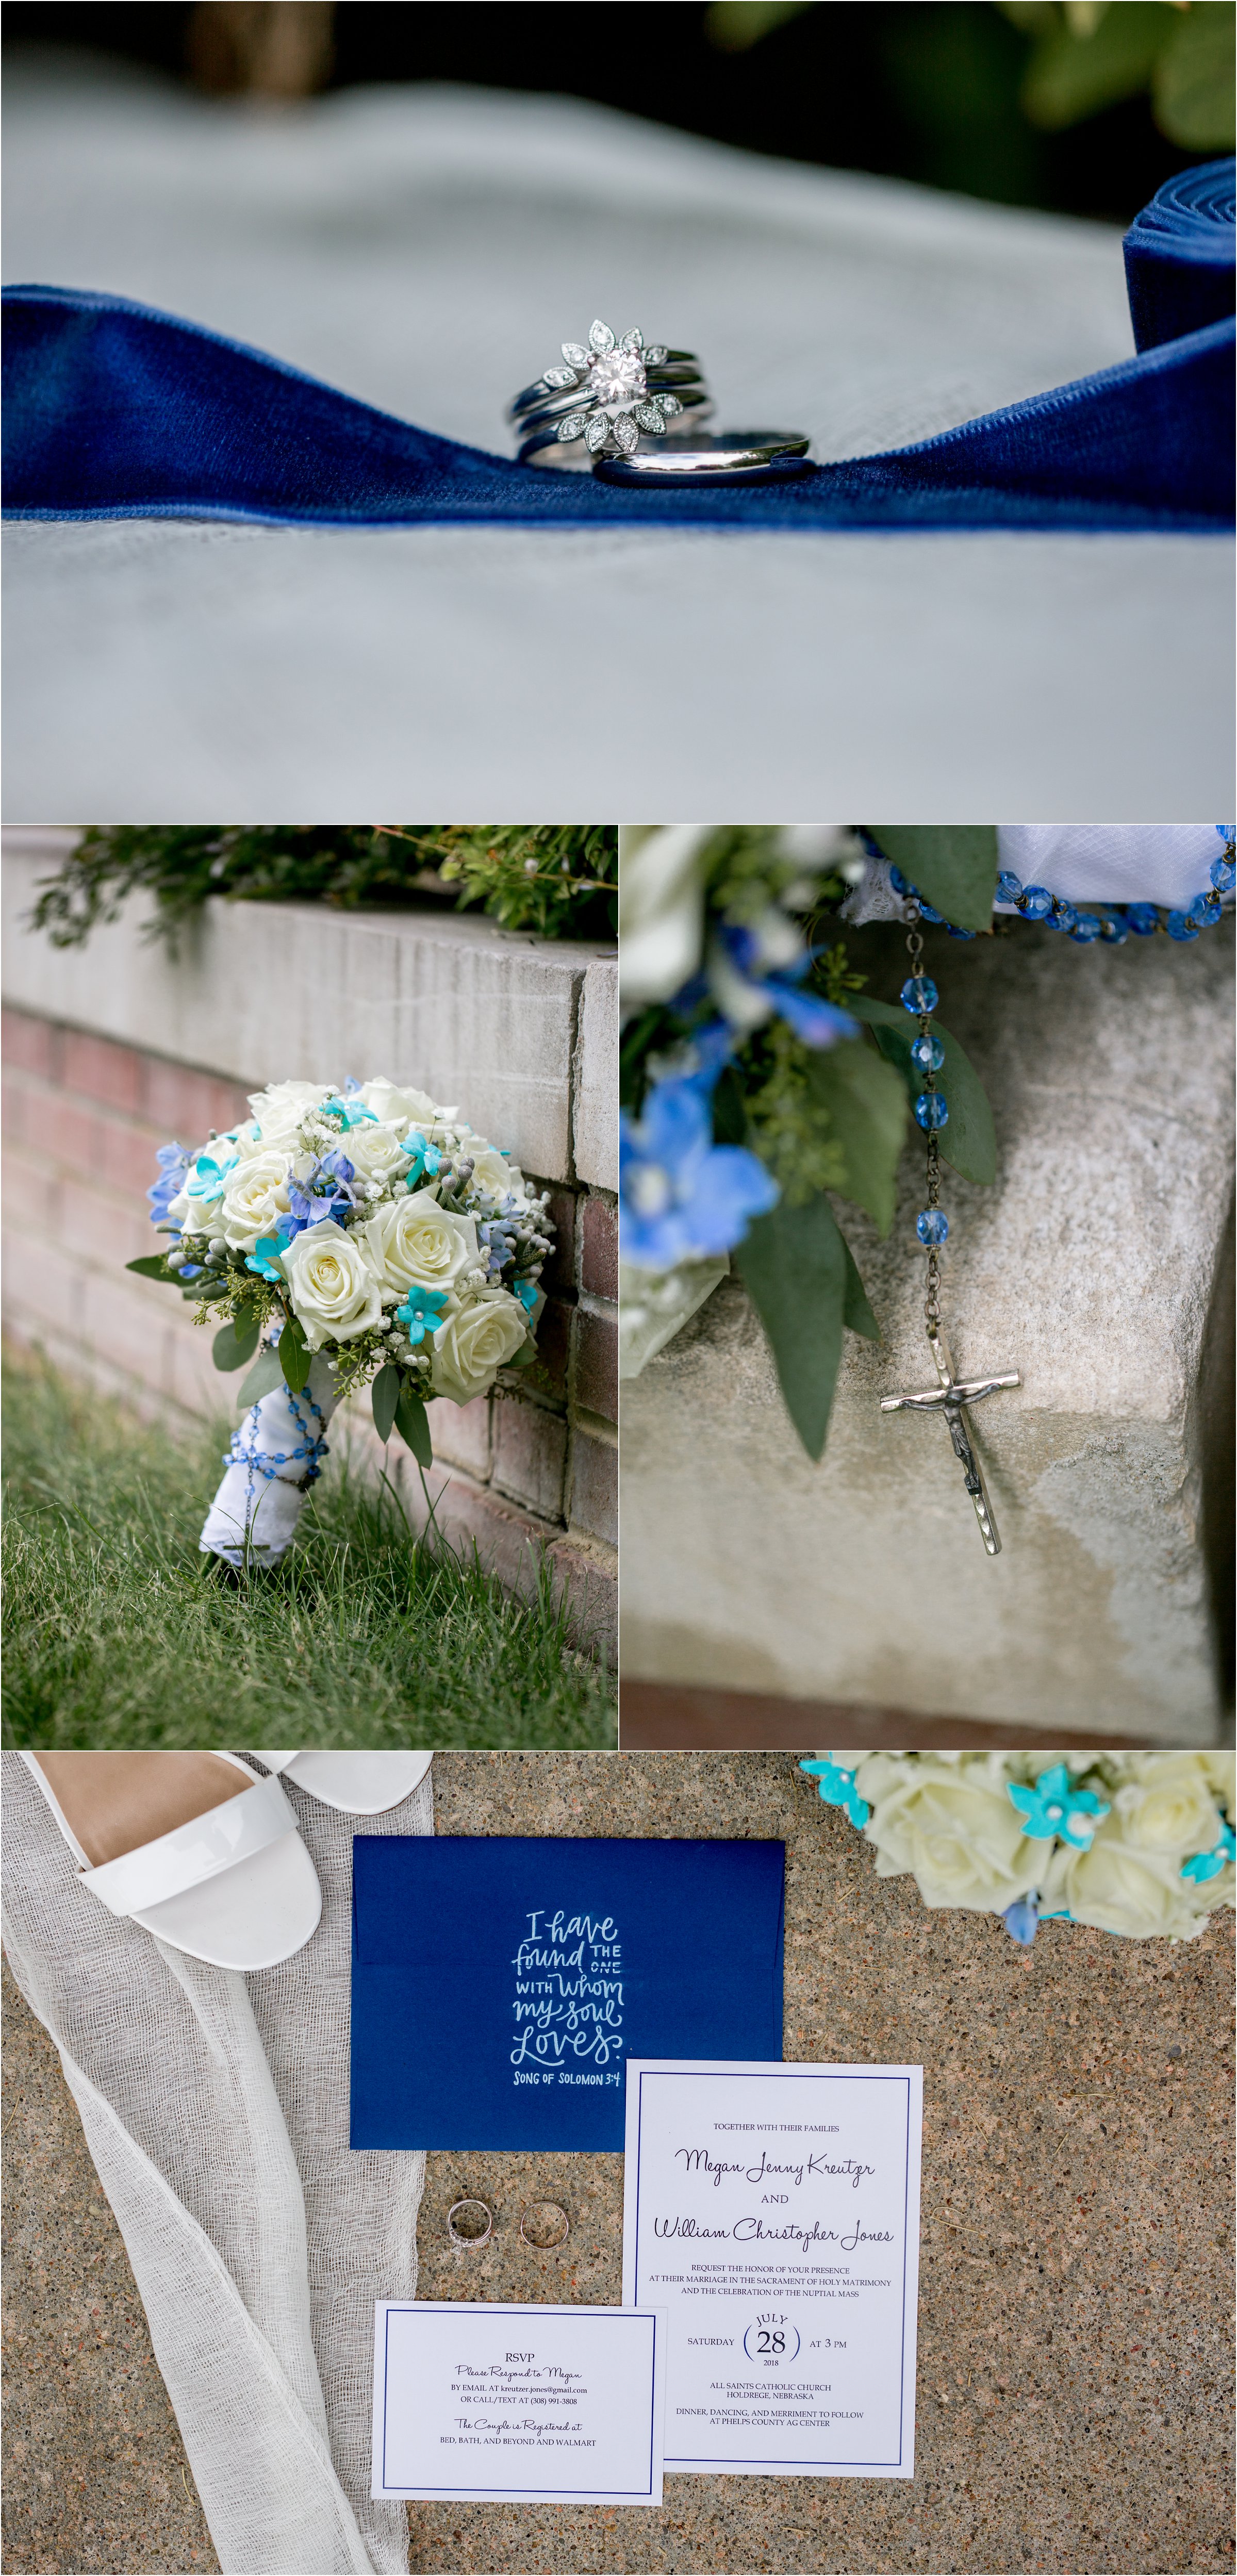 bride and groom's wedding rings on blue ribbon and bouquet with invitation suite